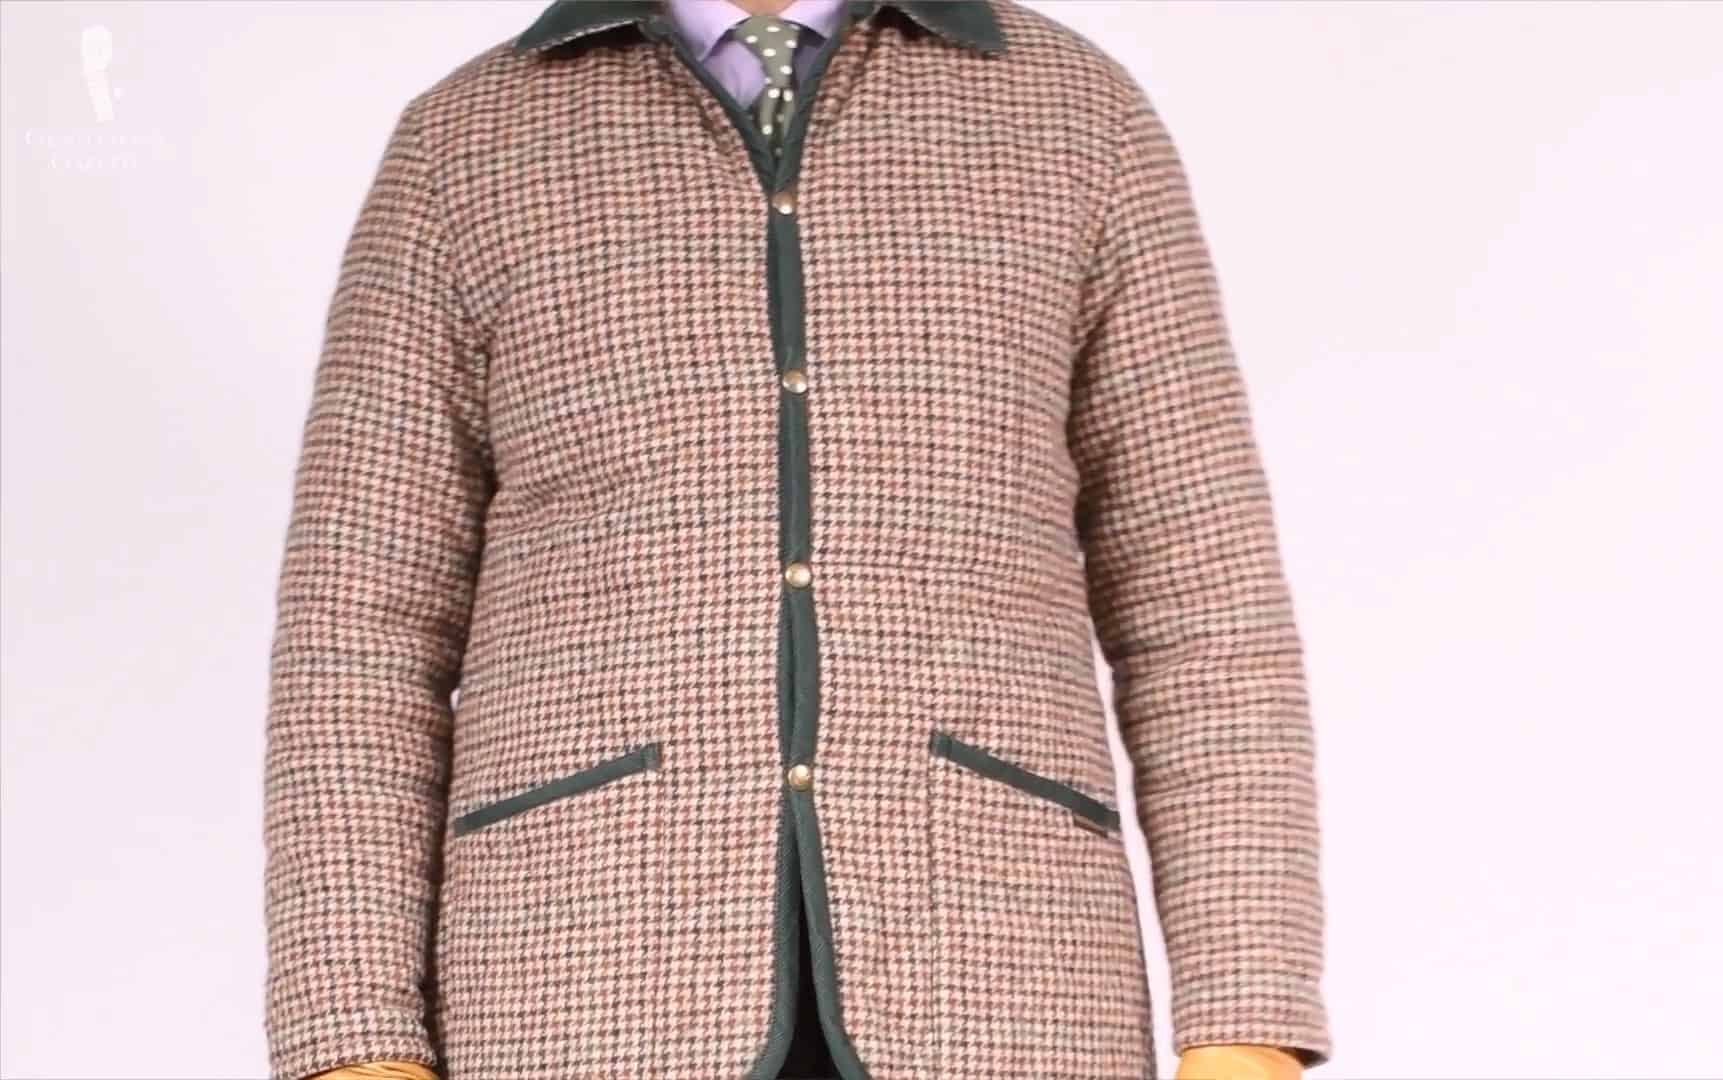 Raphael in his houndstooth-patterned Barbour quilted jacket